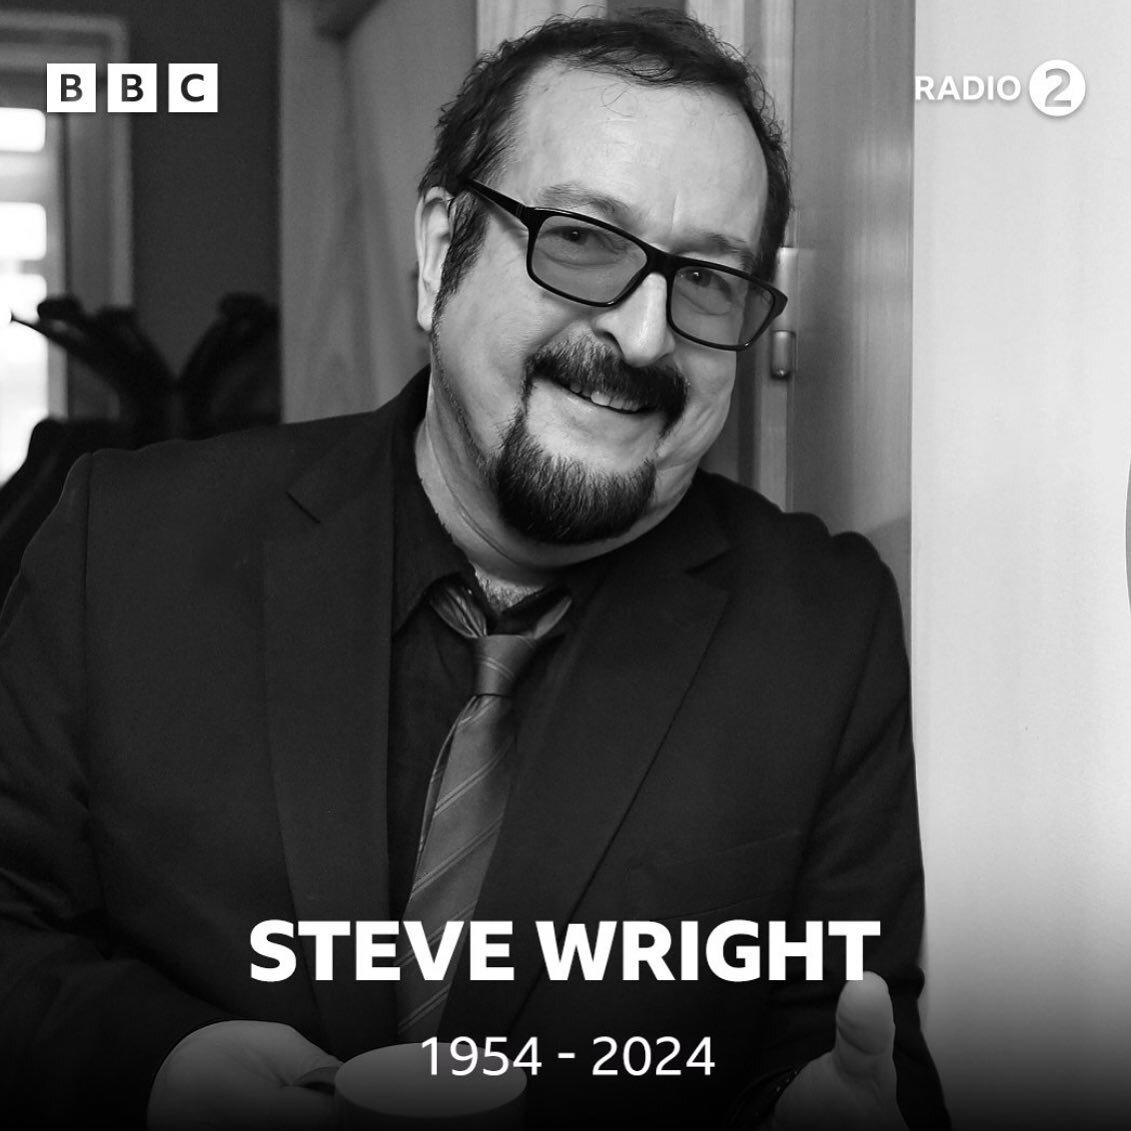 Incredibly sad to hear about the passing of broadcasting legend Steve Wright. 

I listened to him growing up on Radio 1 and when he loved to Radio 2 so did I. 

I was lucky enough to be invited onto his show a few times and it&rsquo;s hard to believe